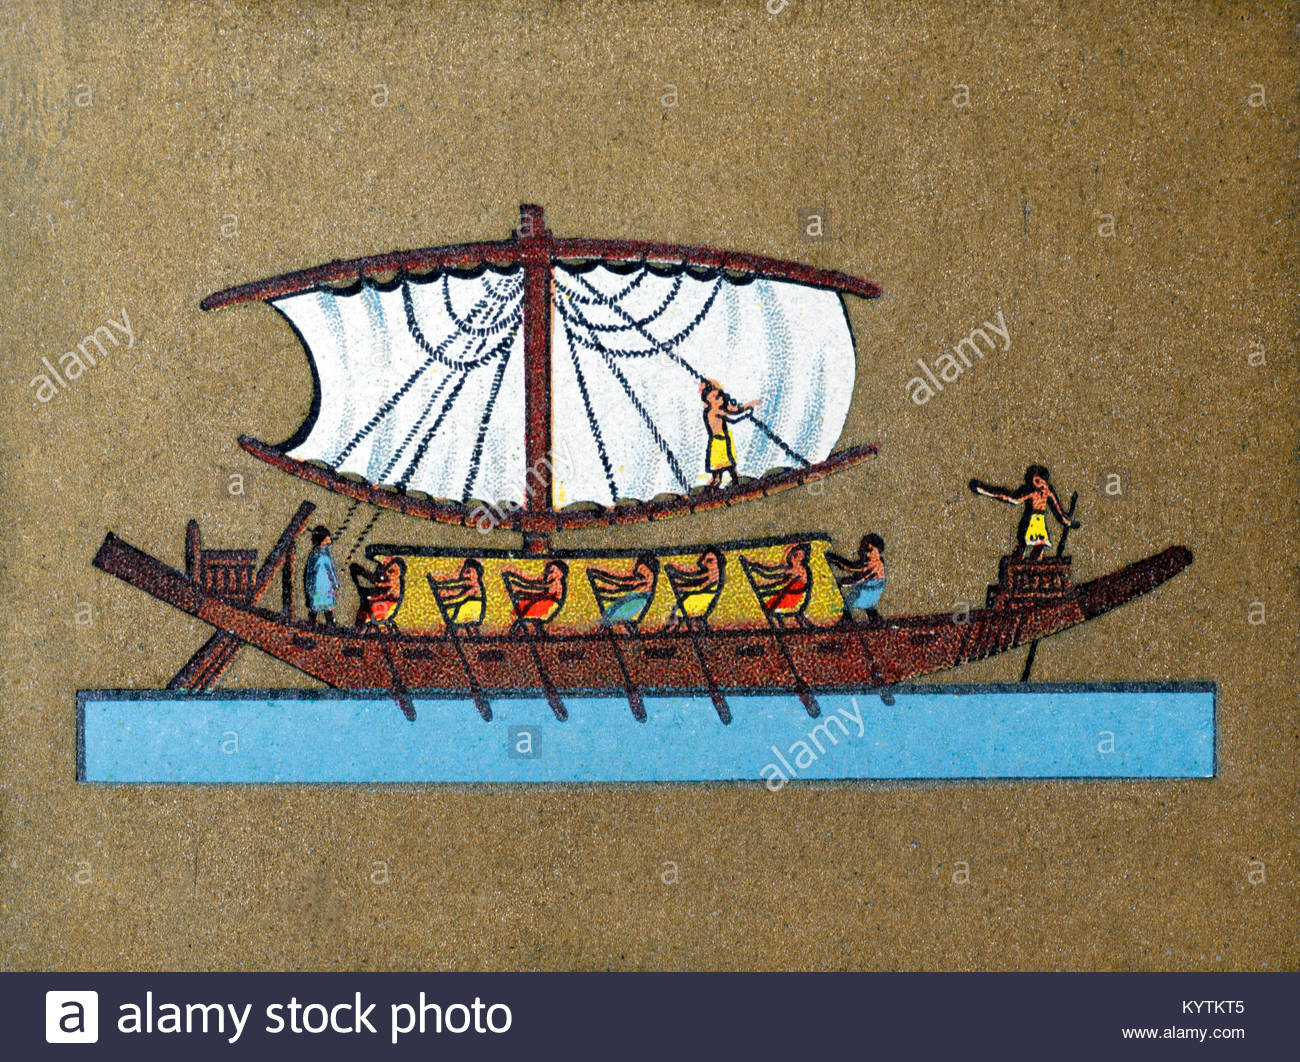 Depiction Of Ancient Egyptian Boats Of The Nile KYTKT5 